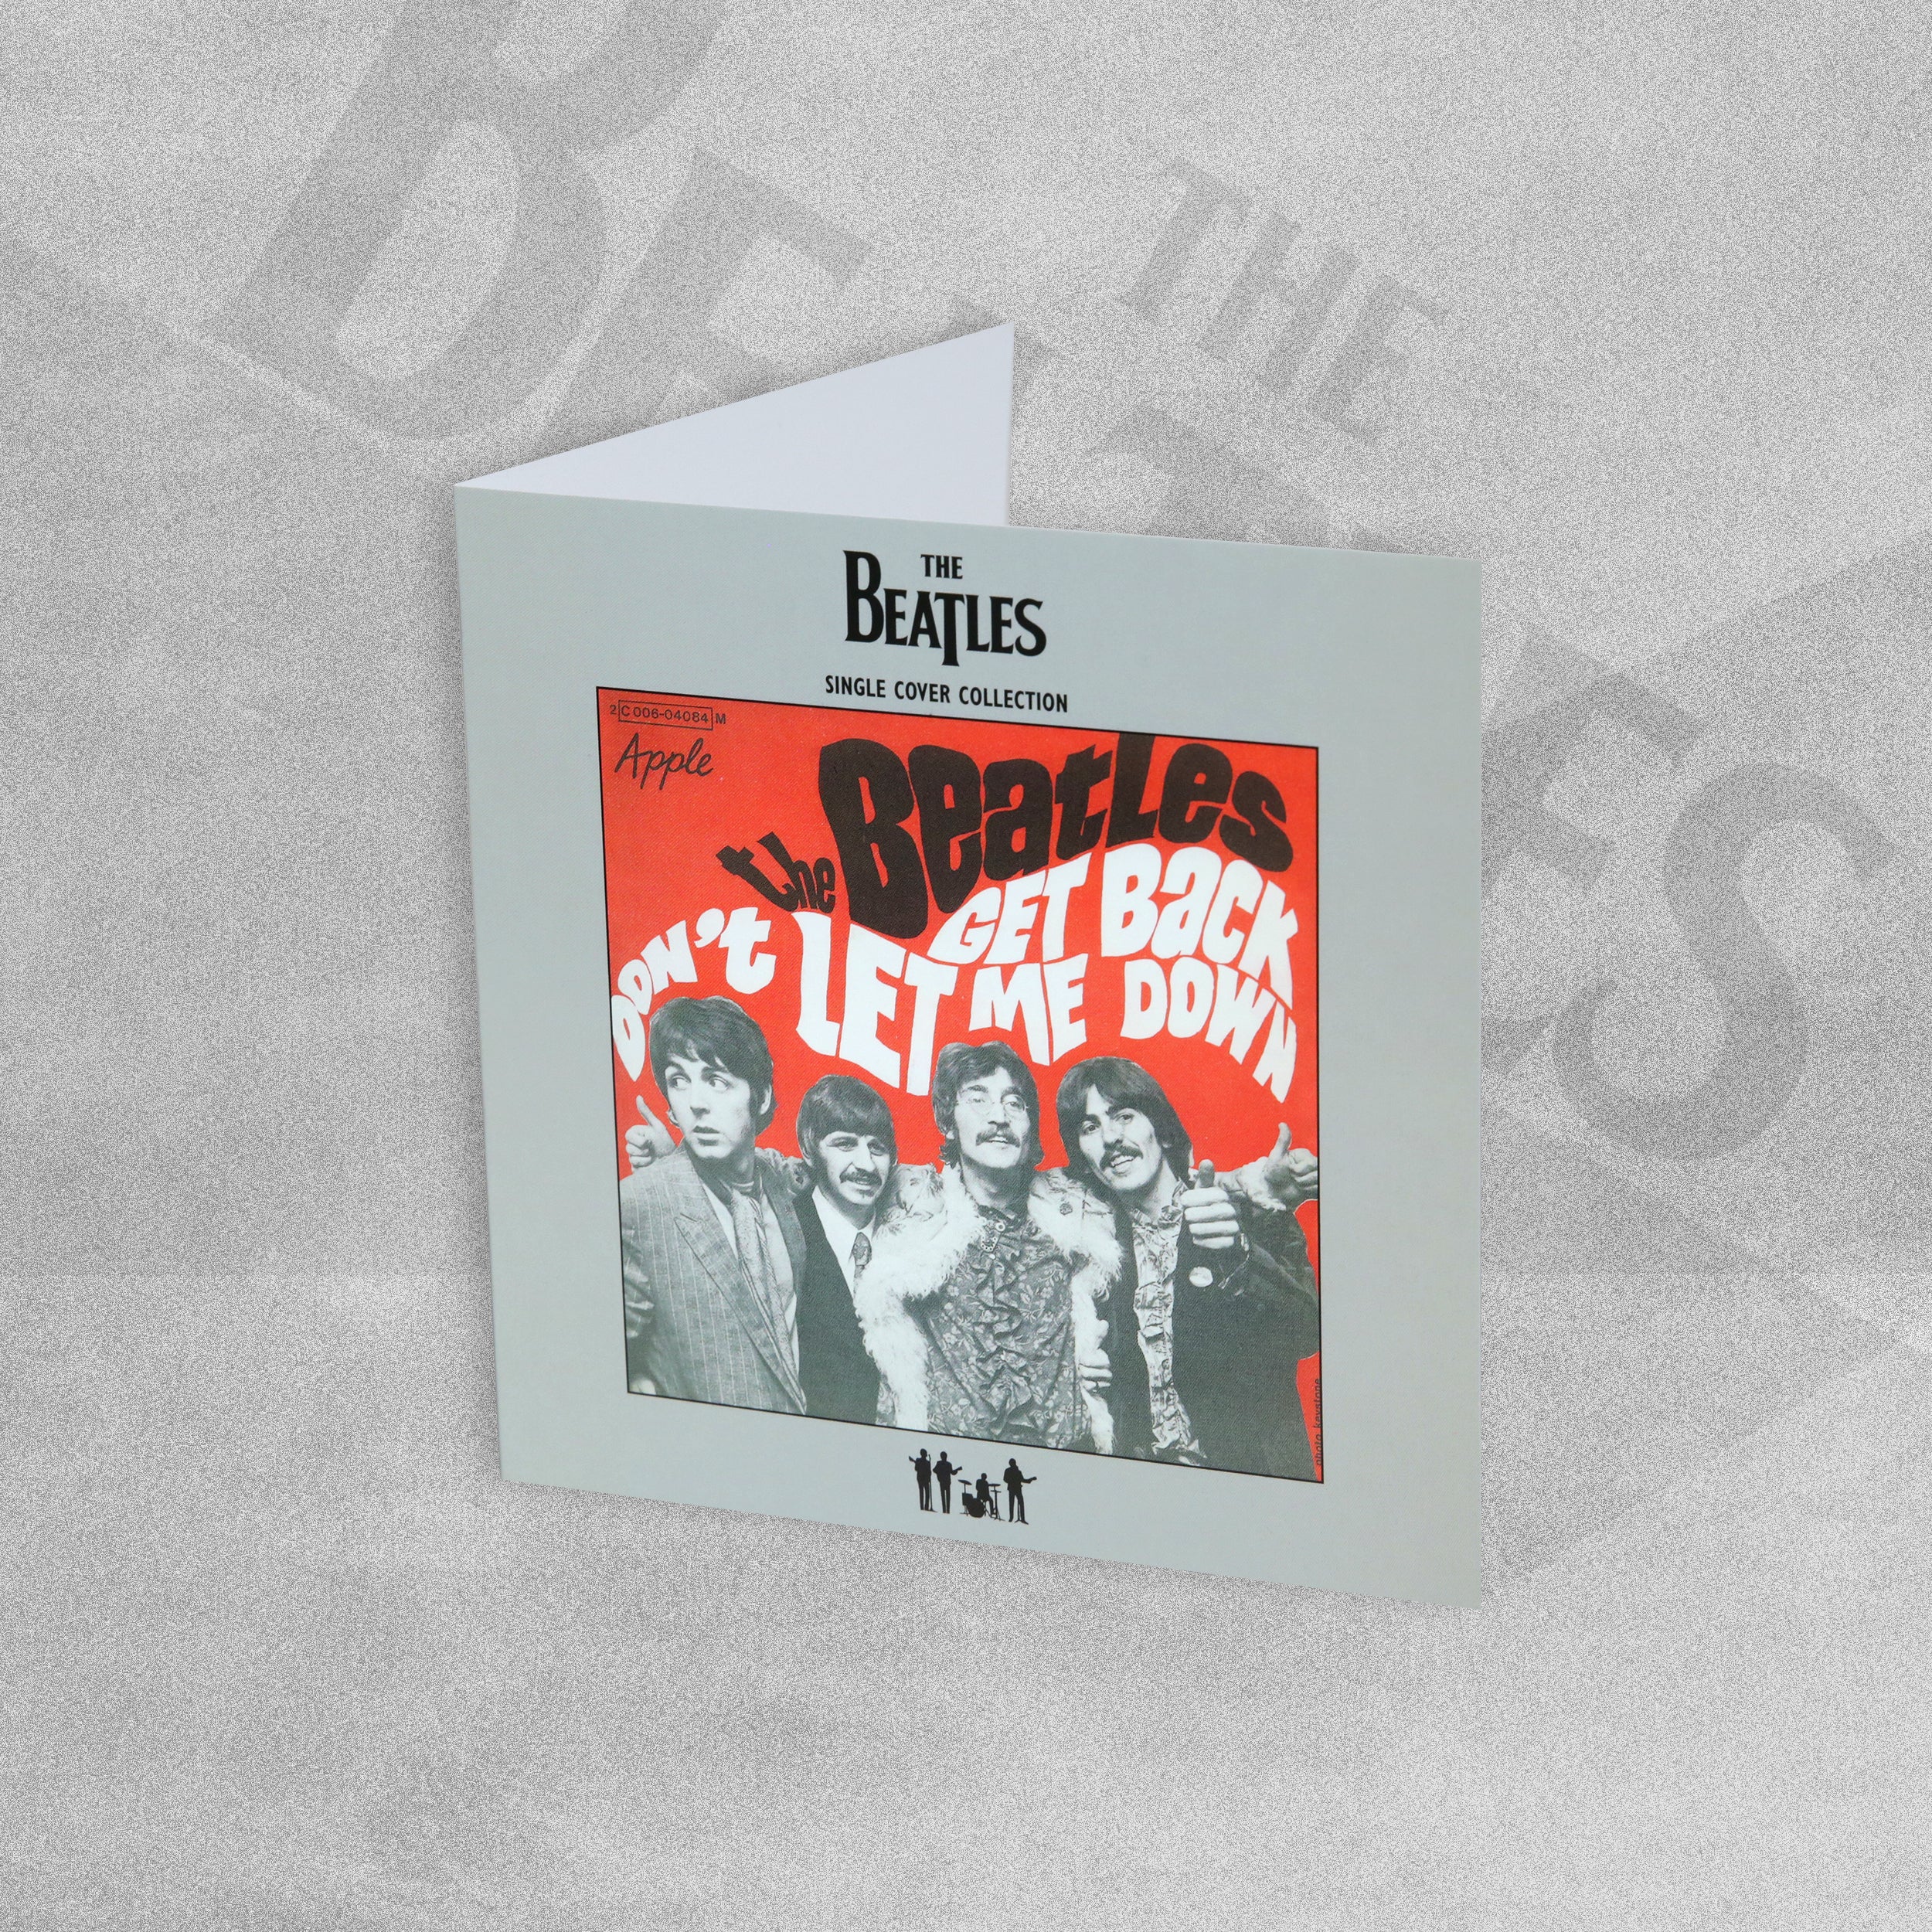 The Beatles Single Cover Collection Greeting Card - Get Back